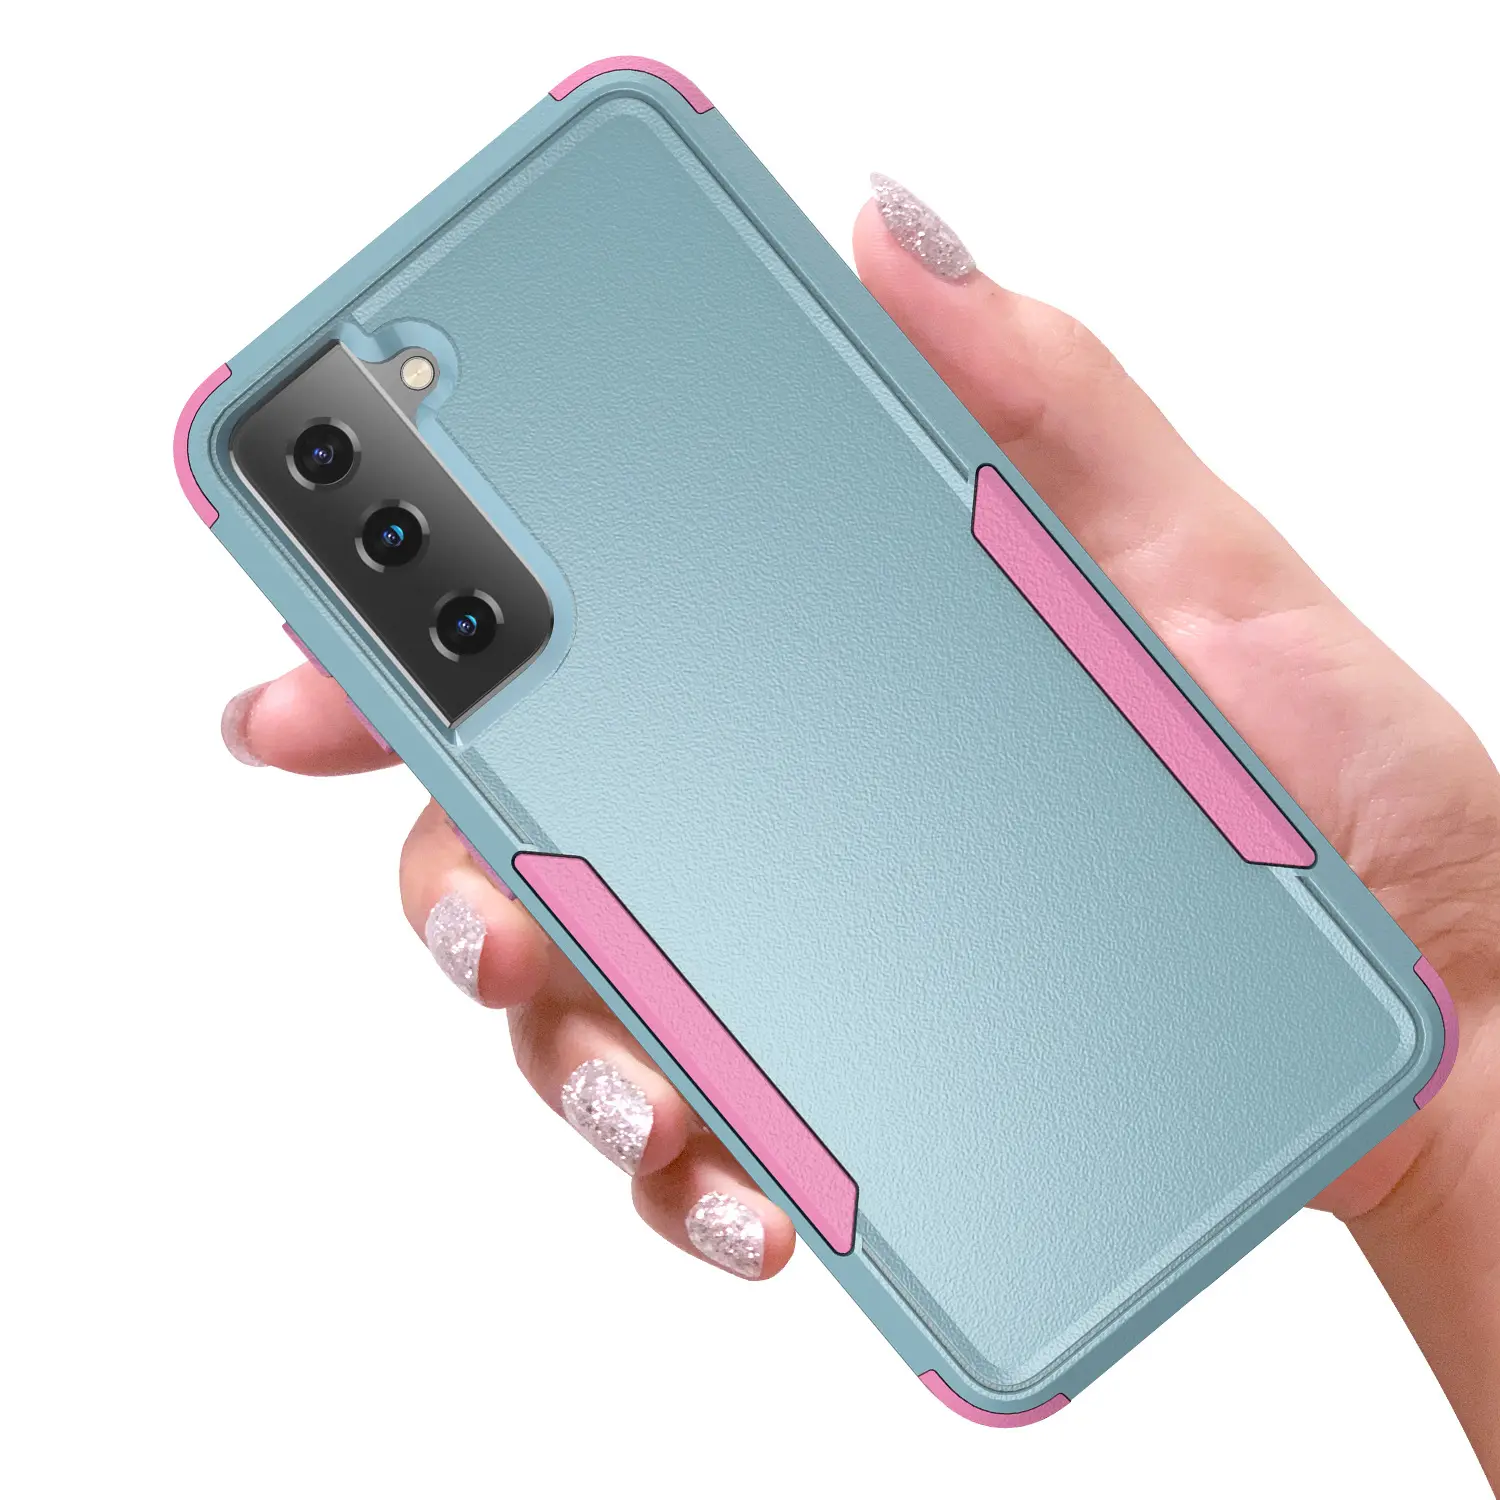 Shockproof Armor Coque Cover 5.3For Lg G5 Case For Lg G5 Se H845 H840 H850 H860 F700 Phone Back Coque Cover Case